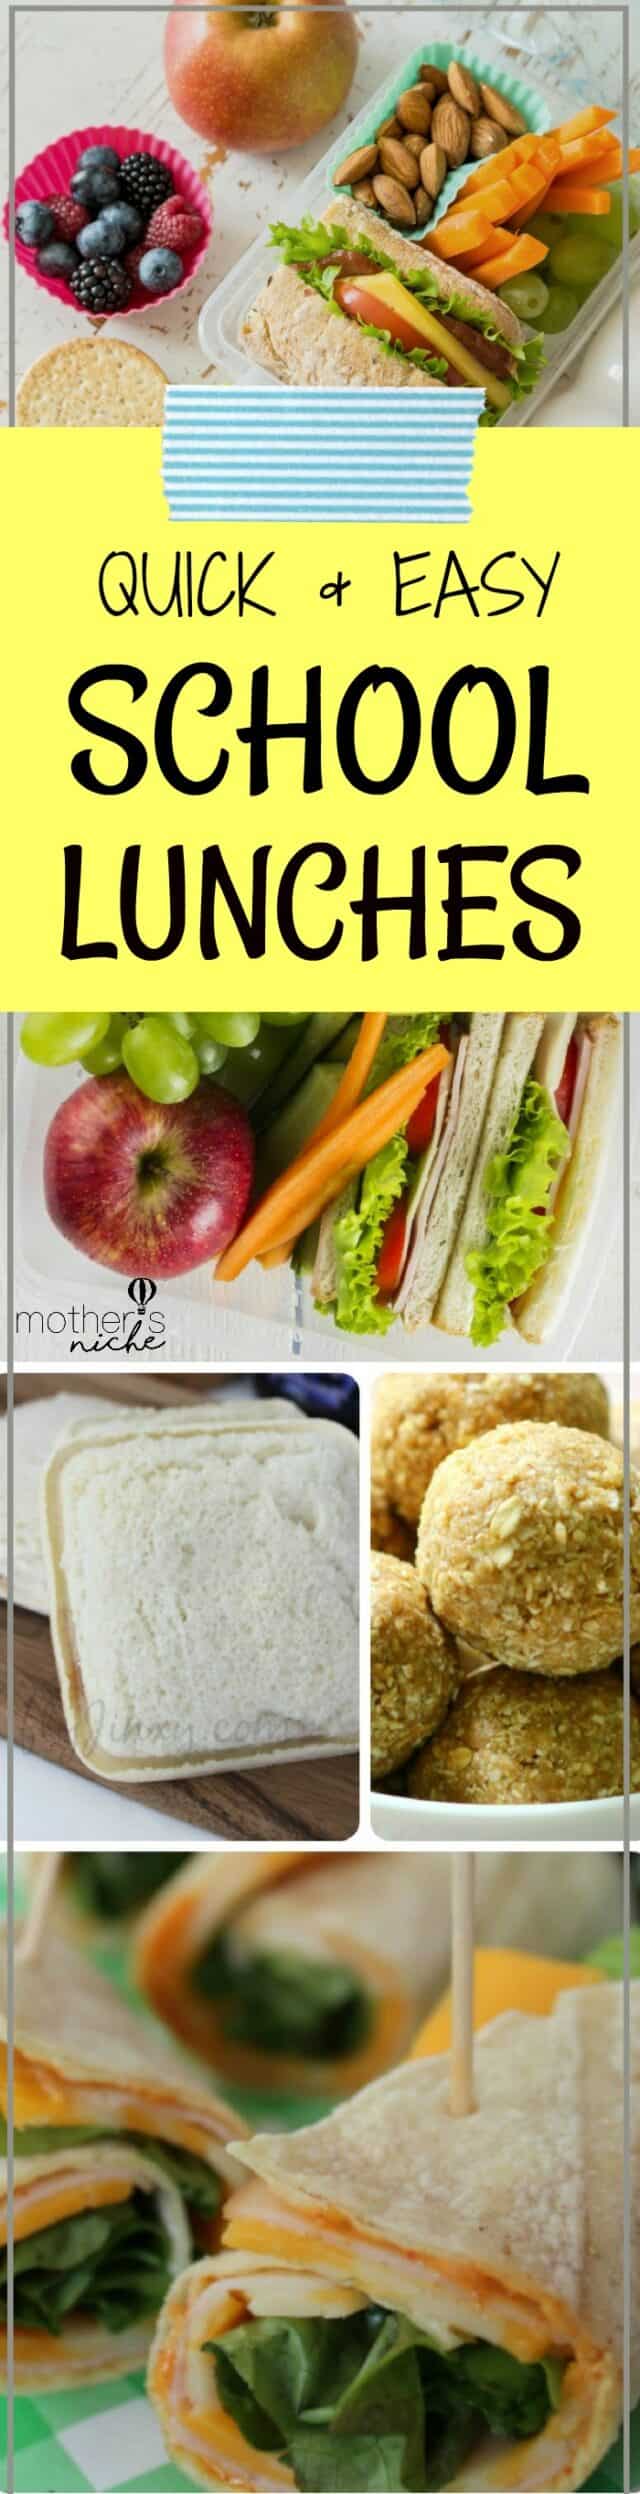 quick and easy school lunch ideas for kids